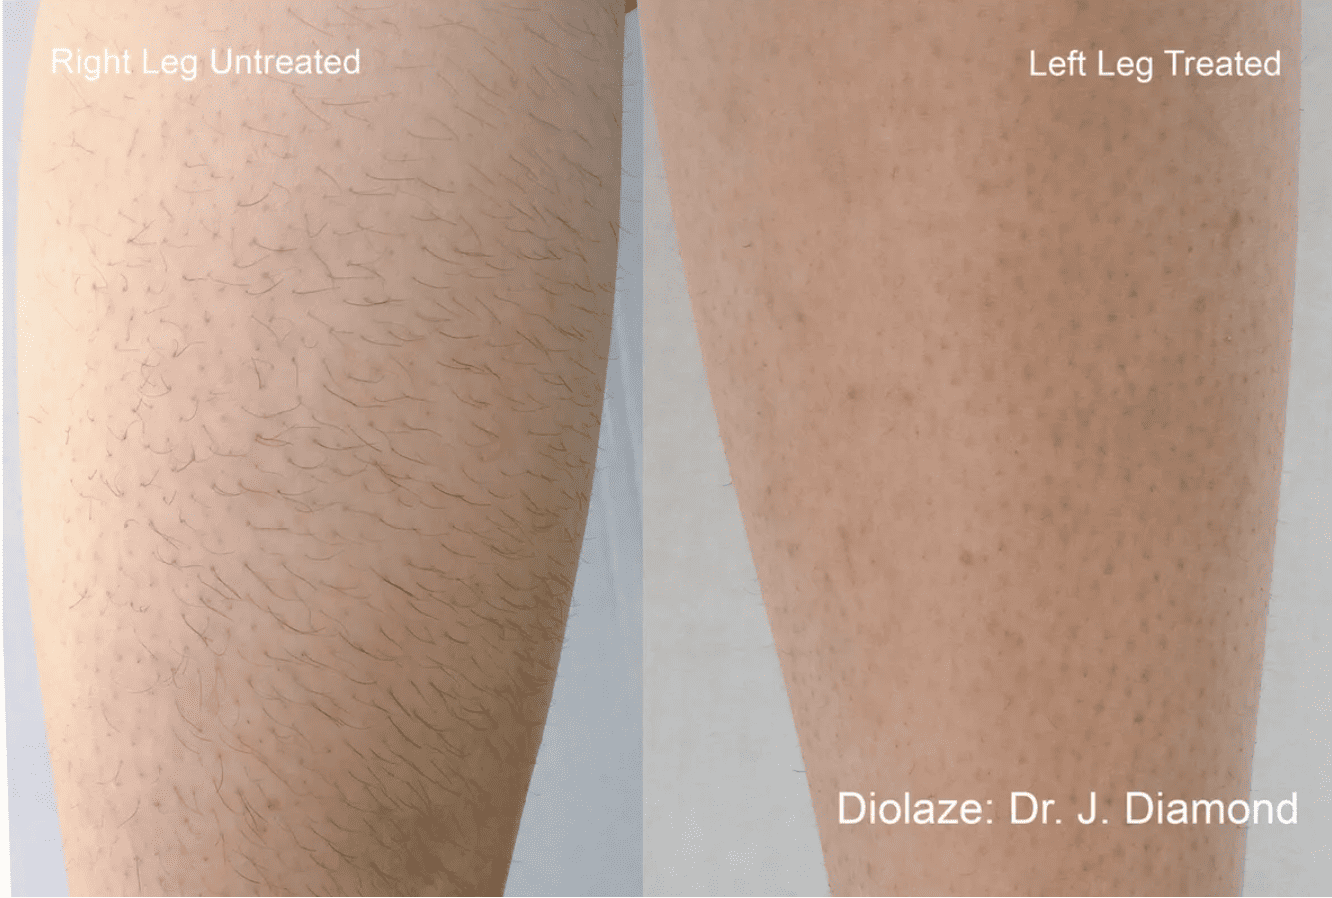 Before and after shots of laser hair removal on the leg.